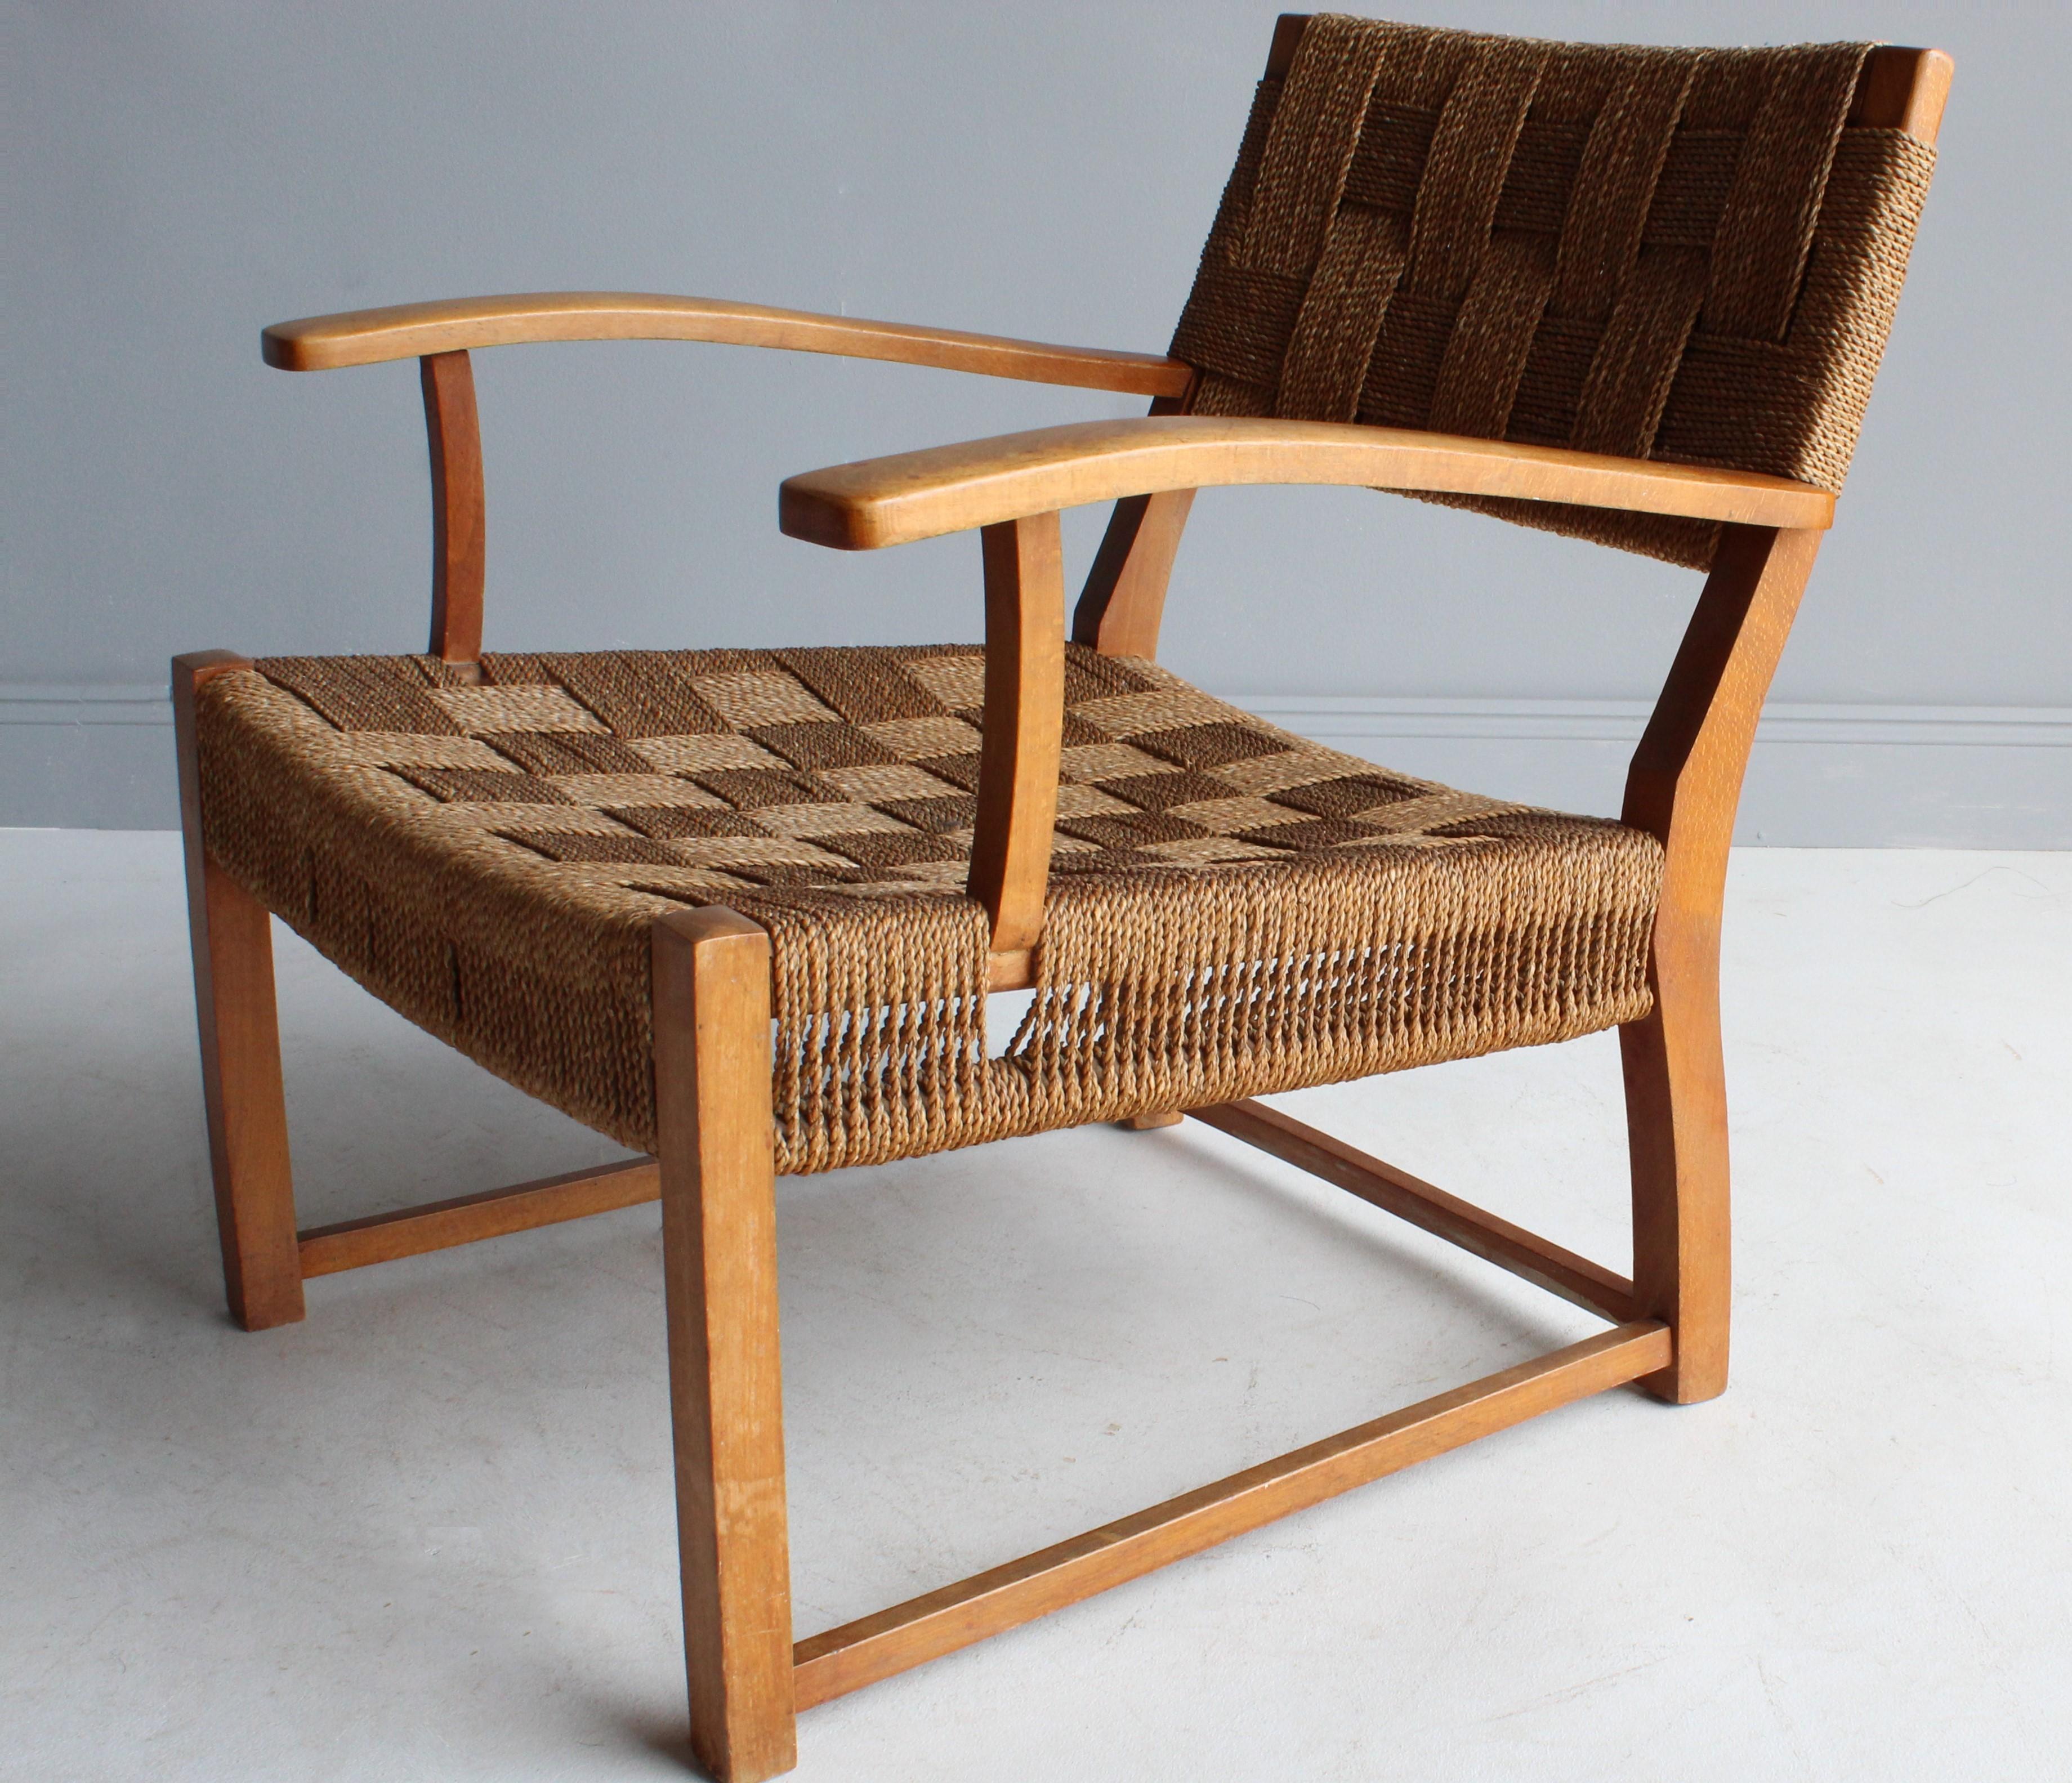 Mid-20th Century Frits Schlegel 'Attributed', Modernist Lounge Chair, Beech, Cord, Denmark, 1940s